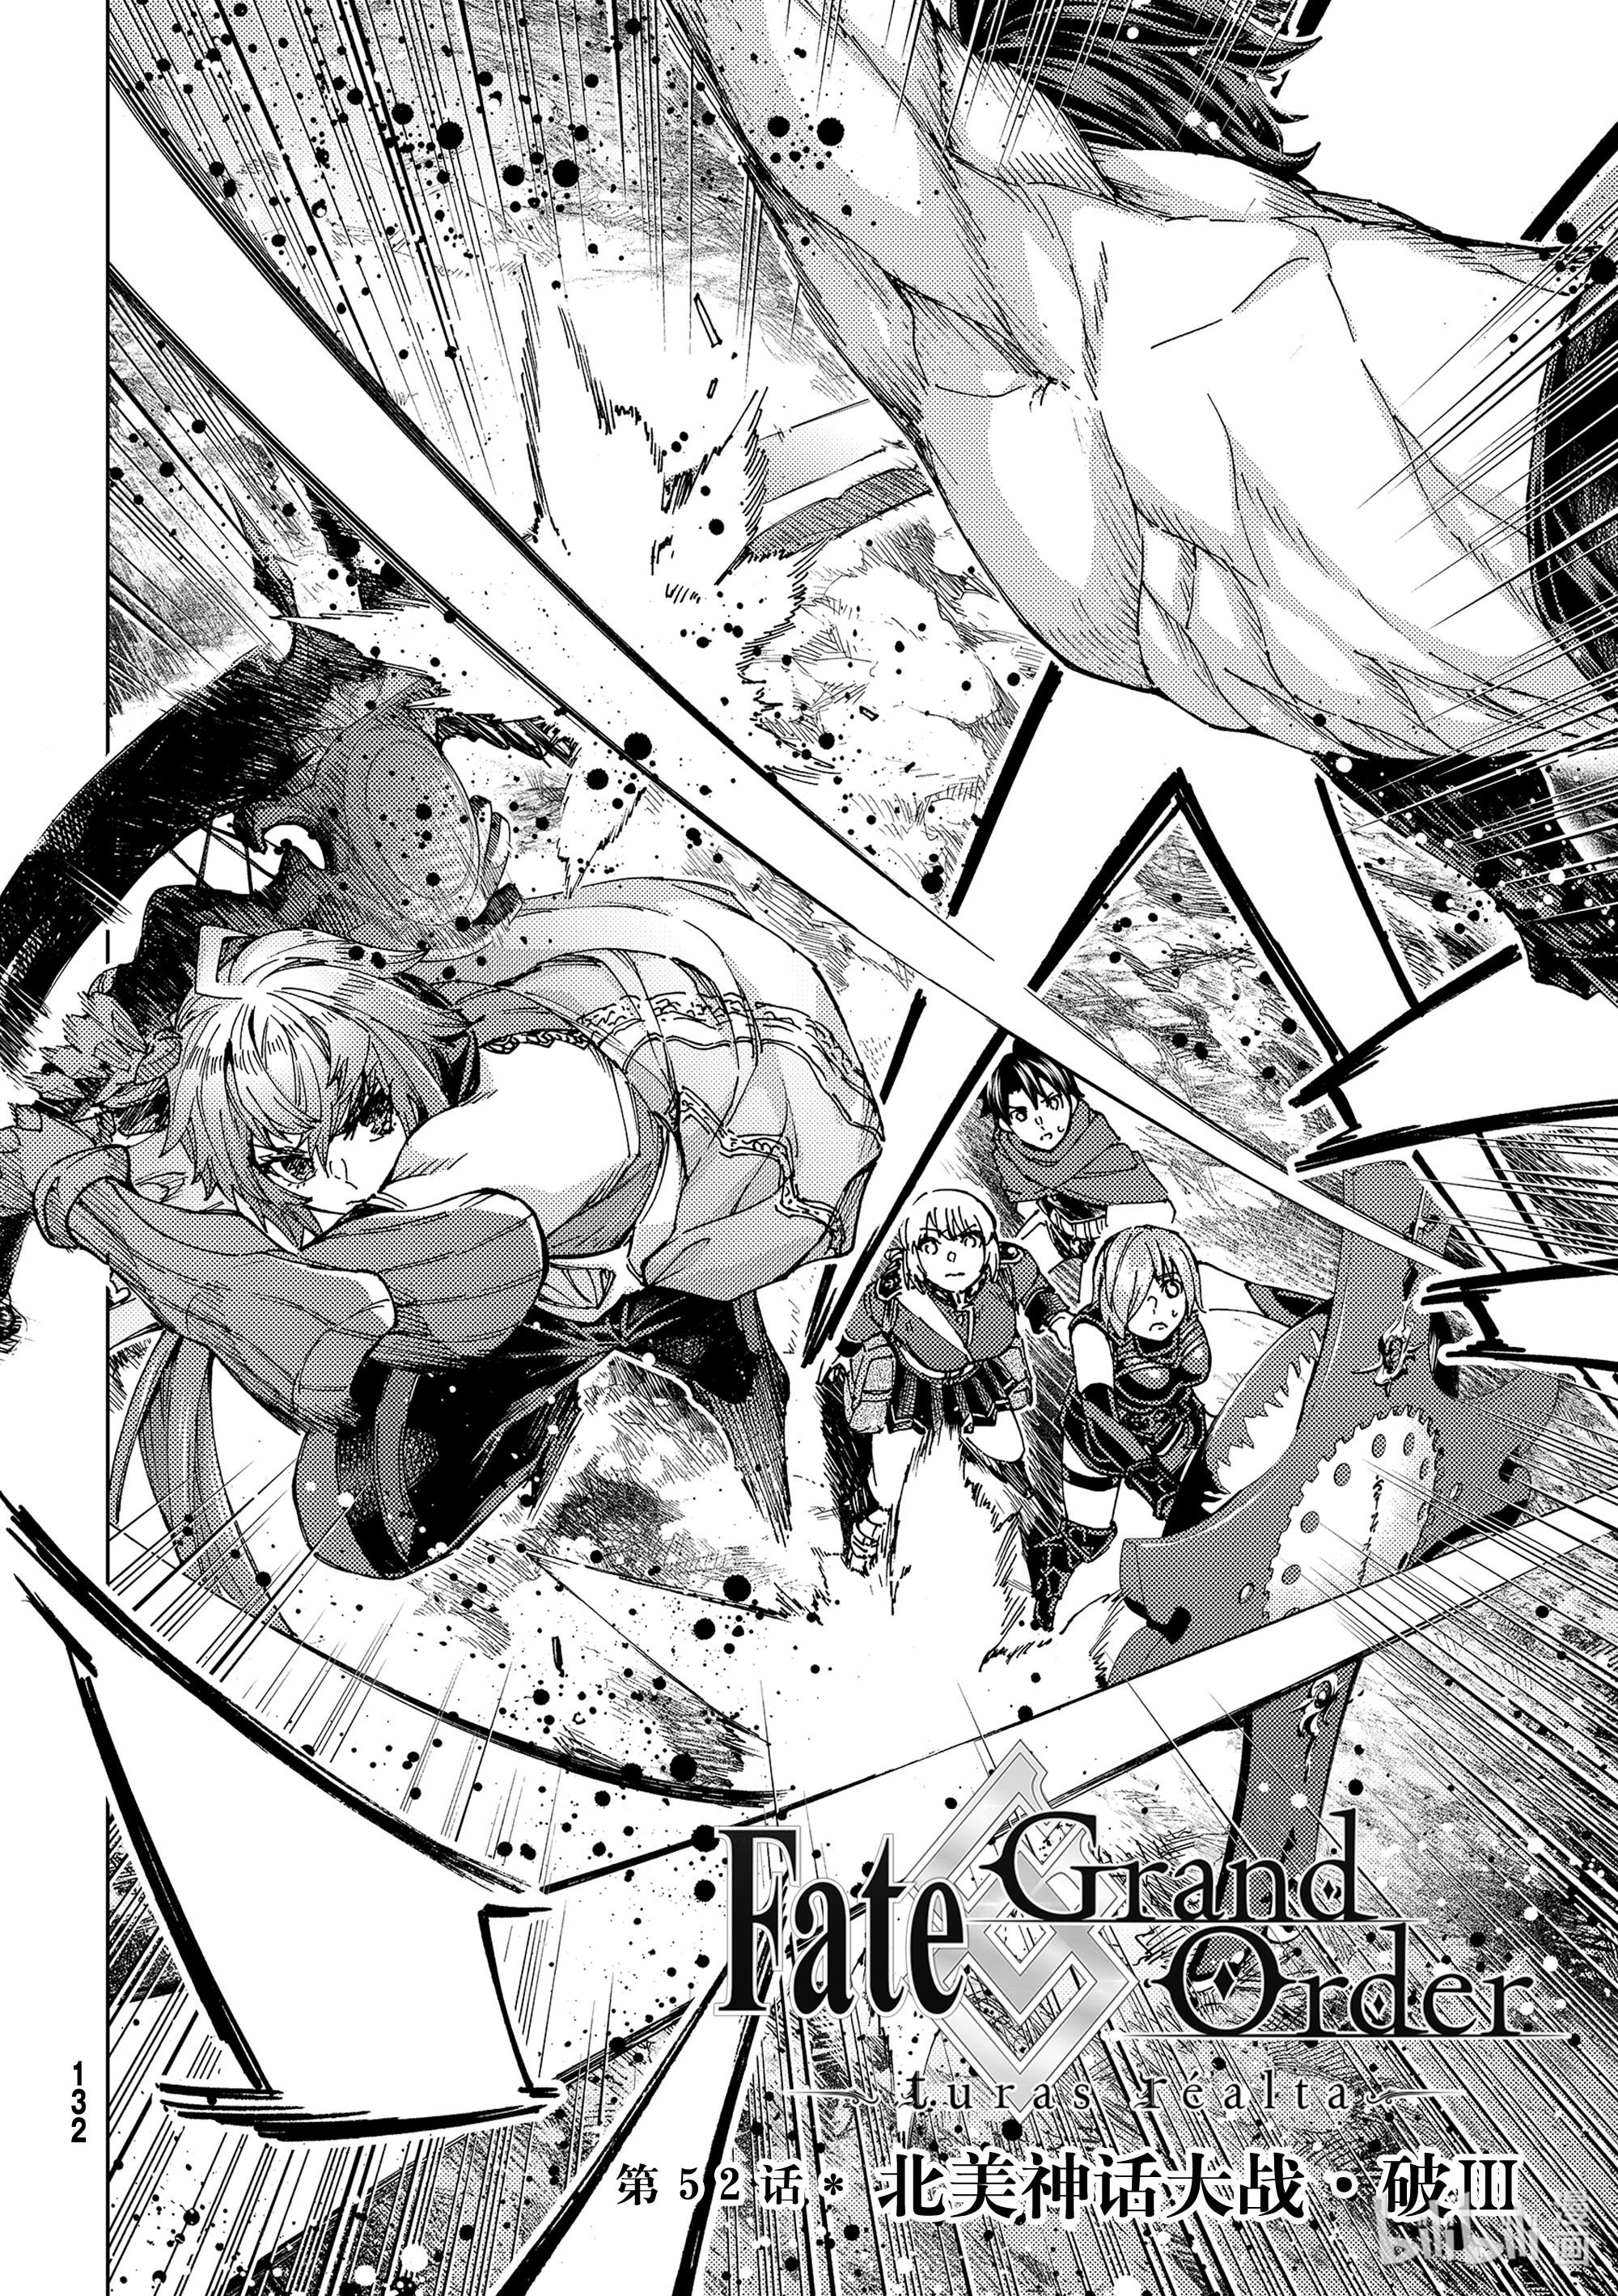 Fate/grand Order -Turas Réalta- Vol.12 Chapter 52: North American Myth War – Middle, Part Iii - Picture 2